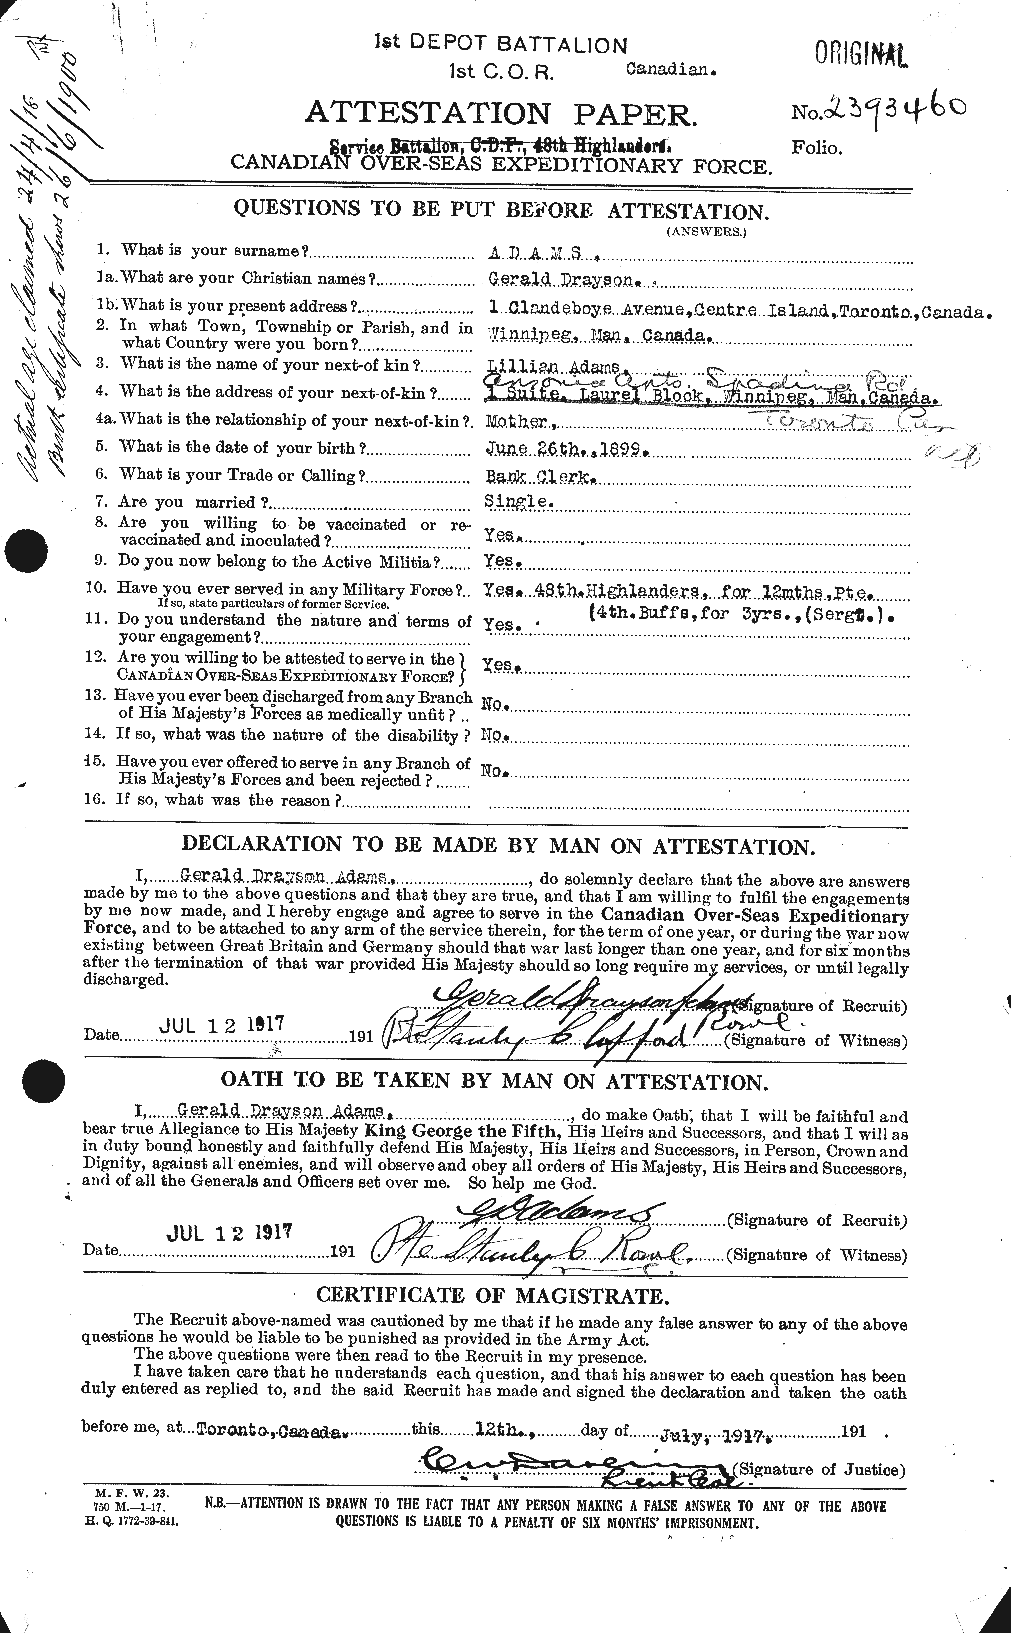 Personnel Records of the First World War - CEF 203130a